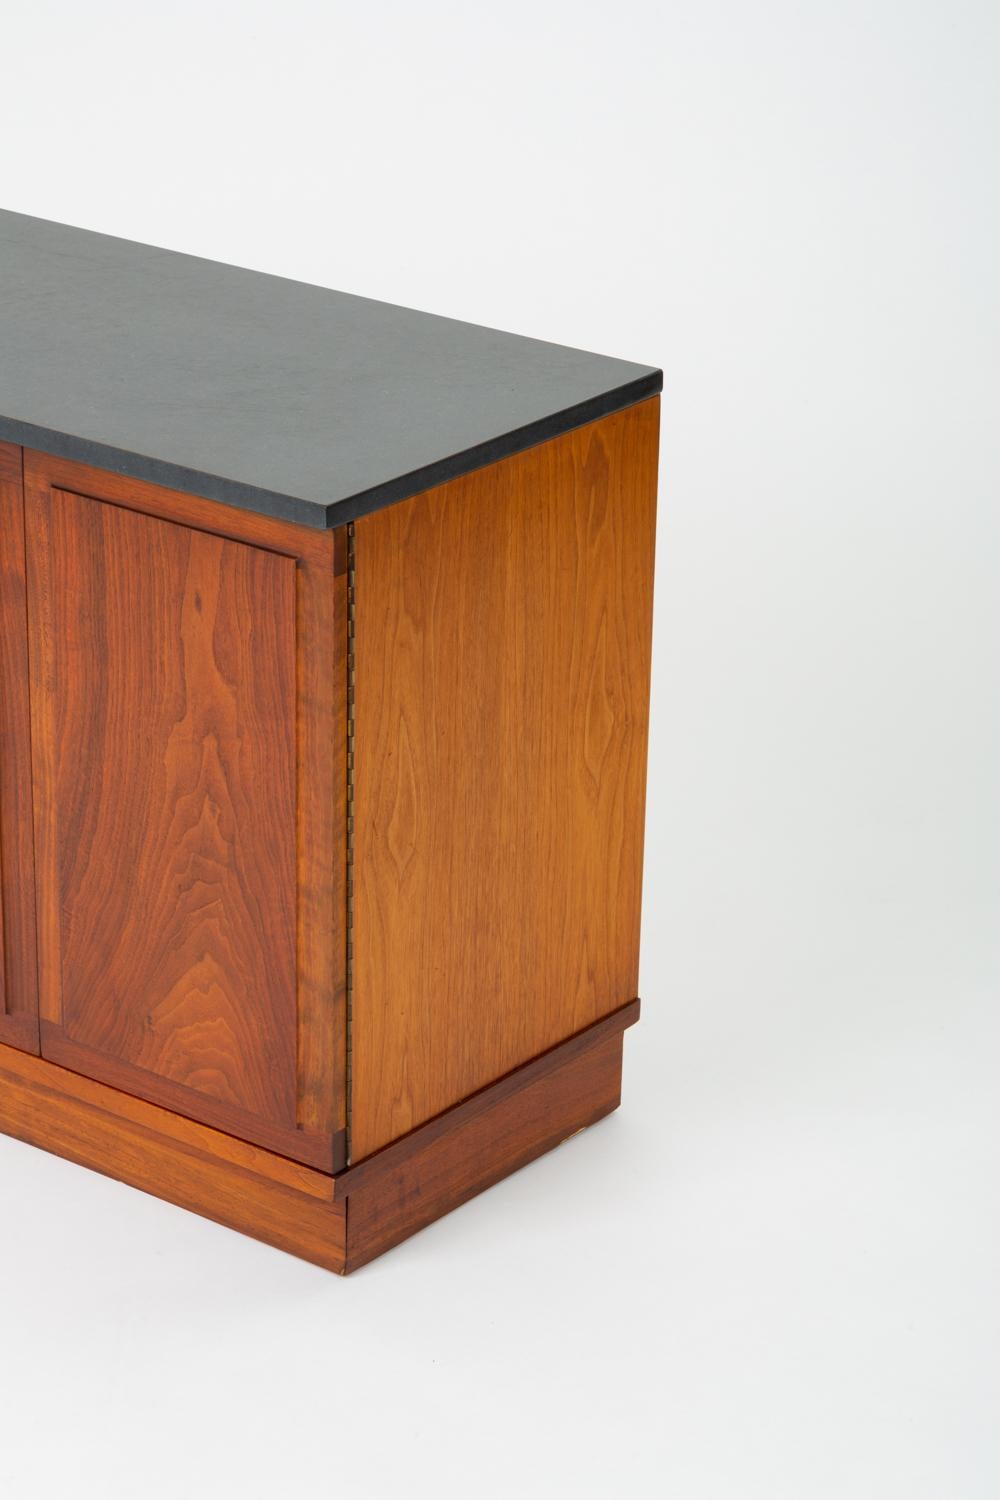 Slate-Top Walnut Sideboard by Jack Cartwright for Founders 5